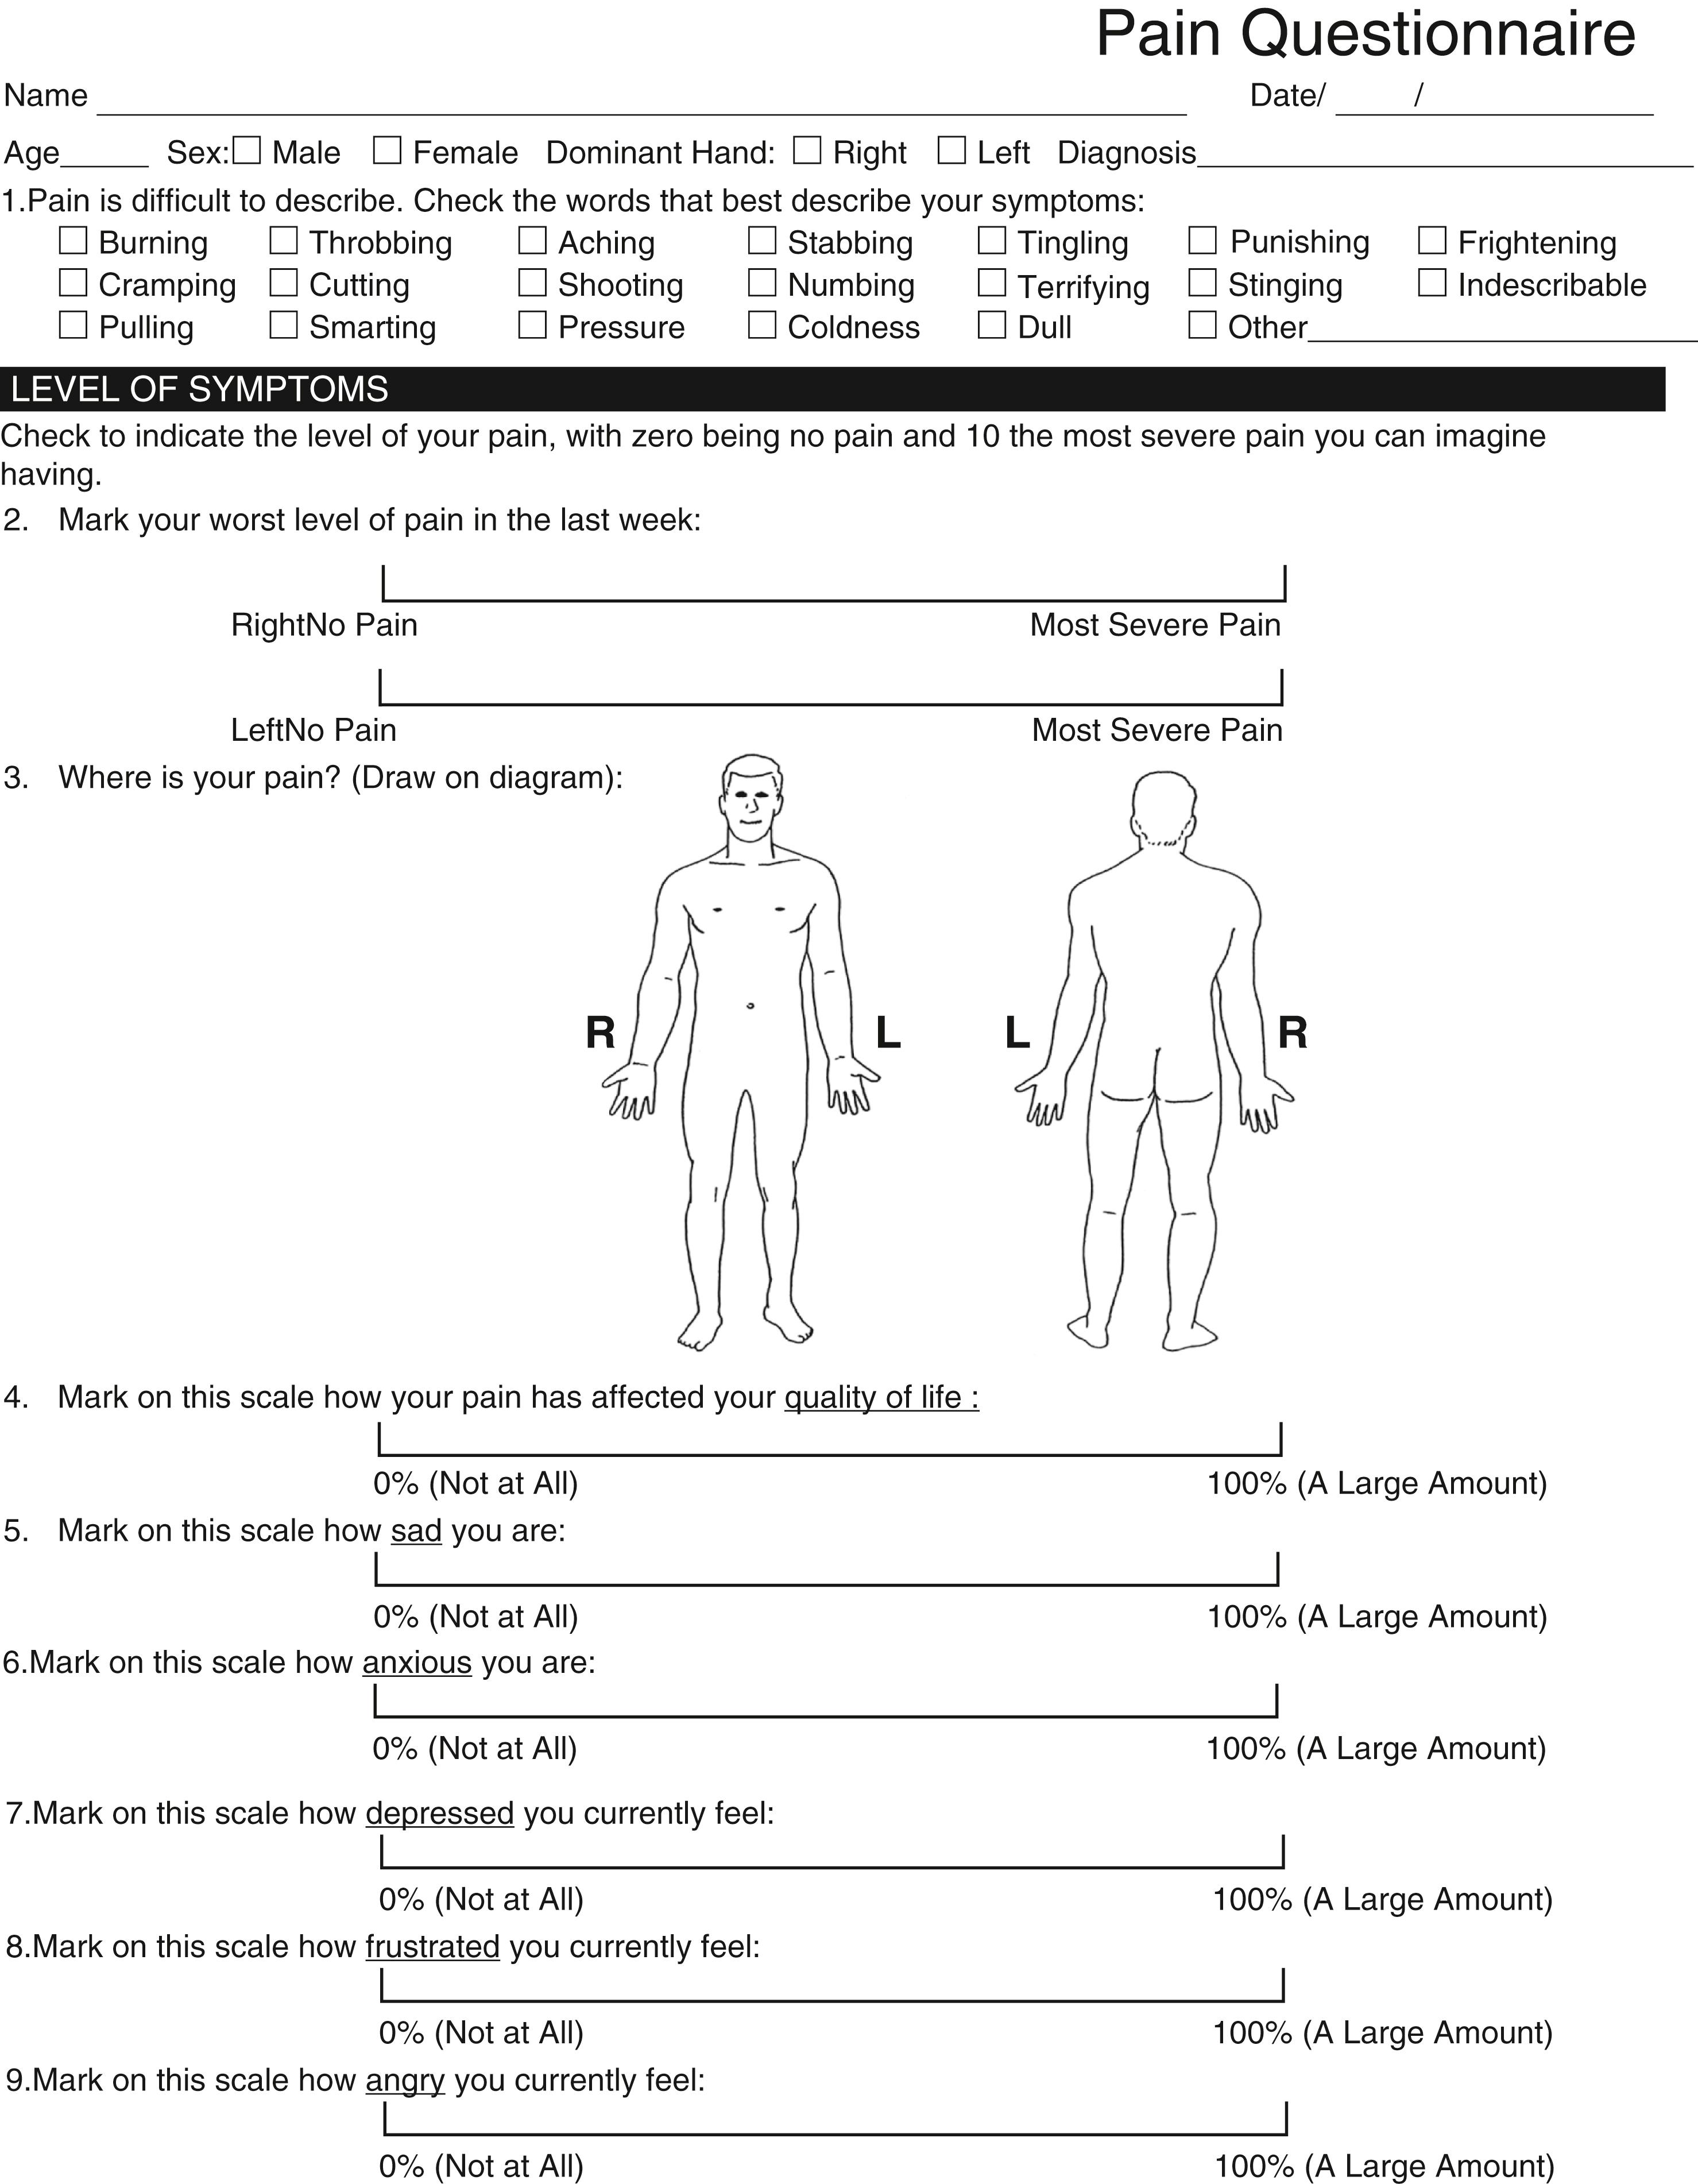 Fig. 28.3, The pain evaluation questionnaire consists of pain adjectives, a body diagram, a questionnaire, and visual analog scales scored from 0 to 10 for pain, stress, and coping. Patients who select more than three adjectives, draw a pain pattern that does not follow a known anatomic pattern, or score more than 20 on the questionnaire are considered positive for that component. Patients who score positive in more than two components are considered for psychological or psychiatric evaluation before any surgical intervention.